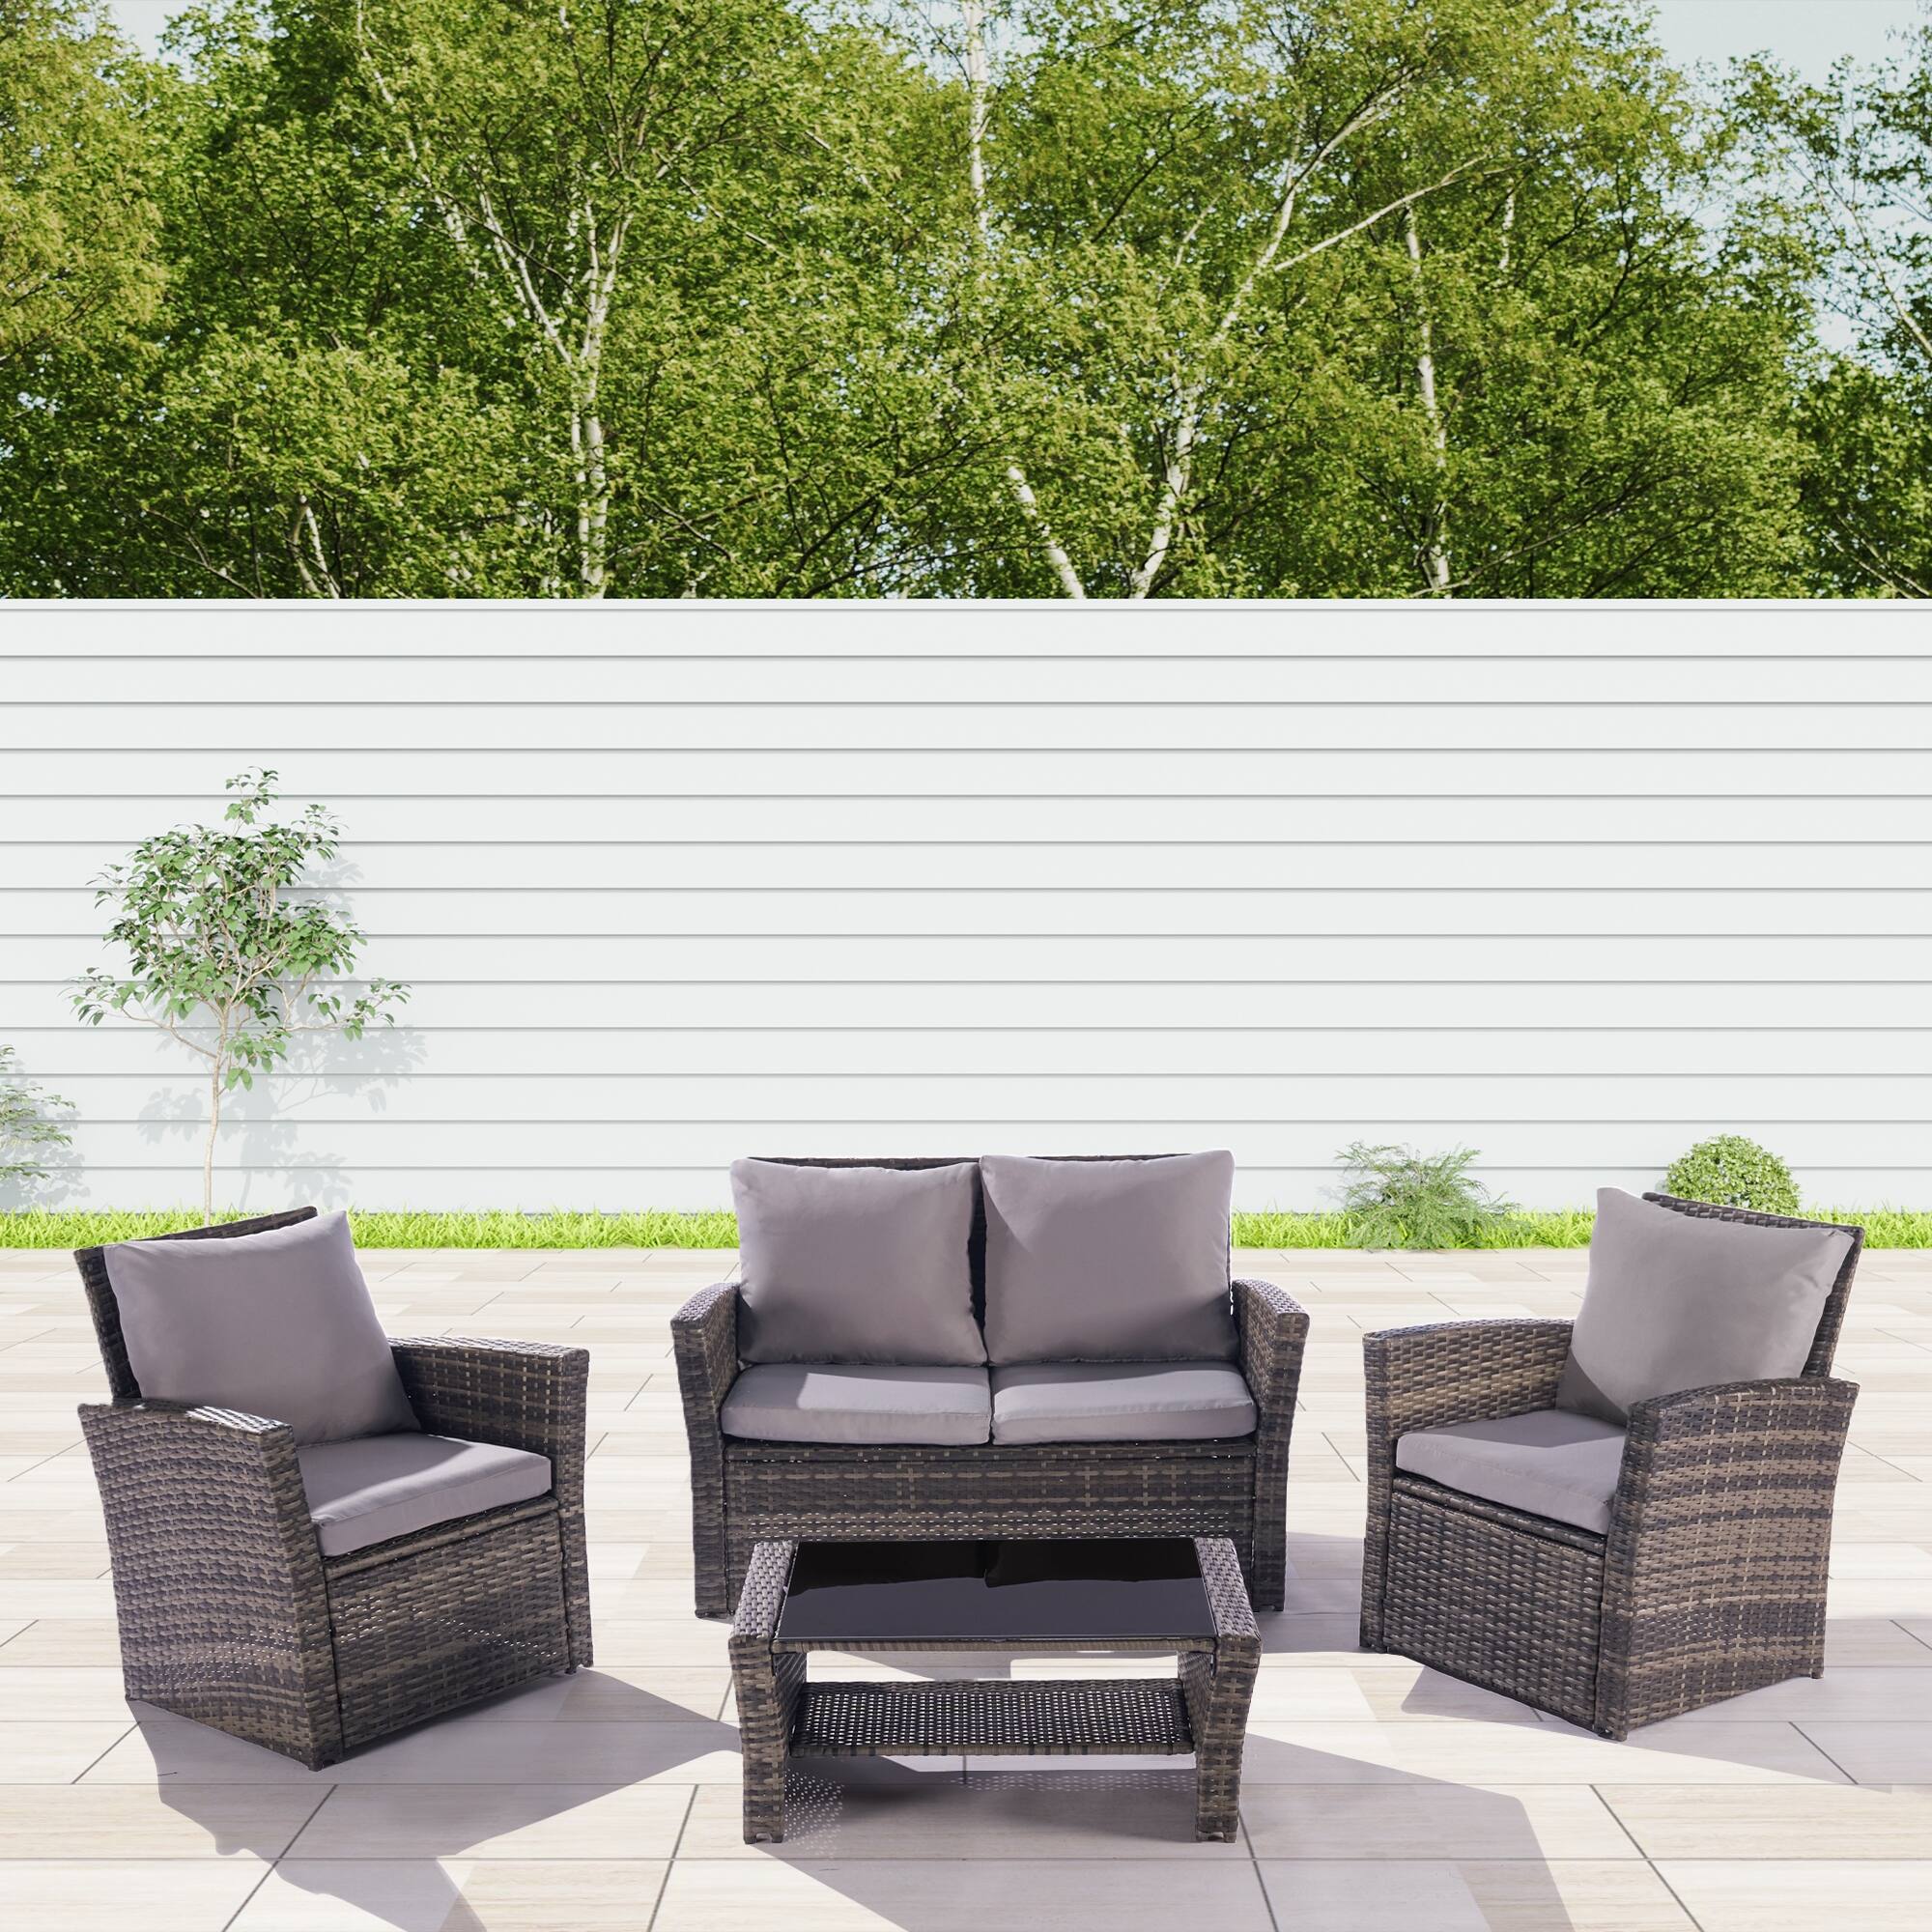 4-piece Modular Outdoor Rattan Sofa And Table Set With Tempered Glass